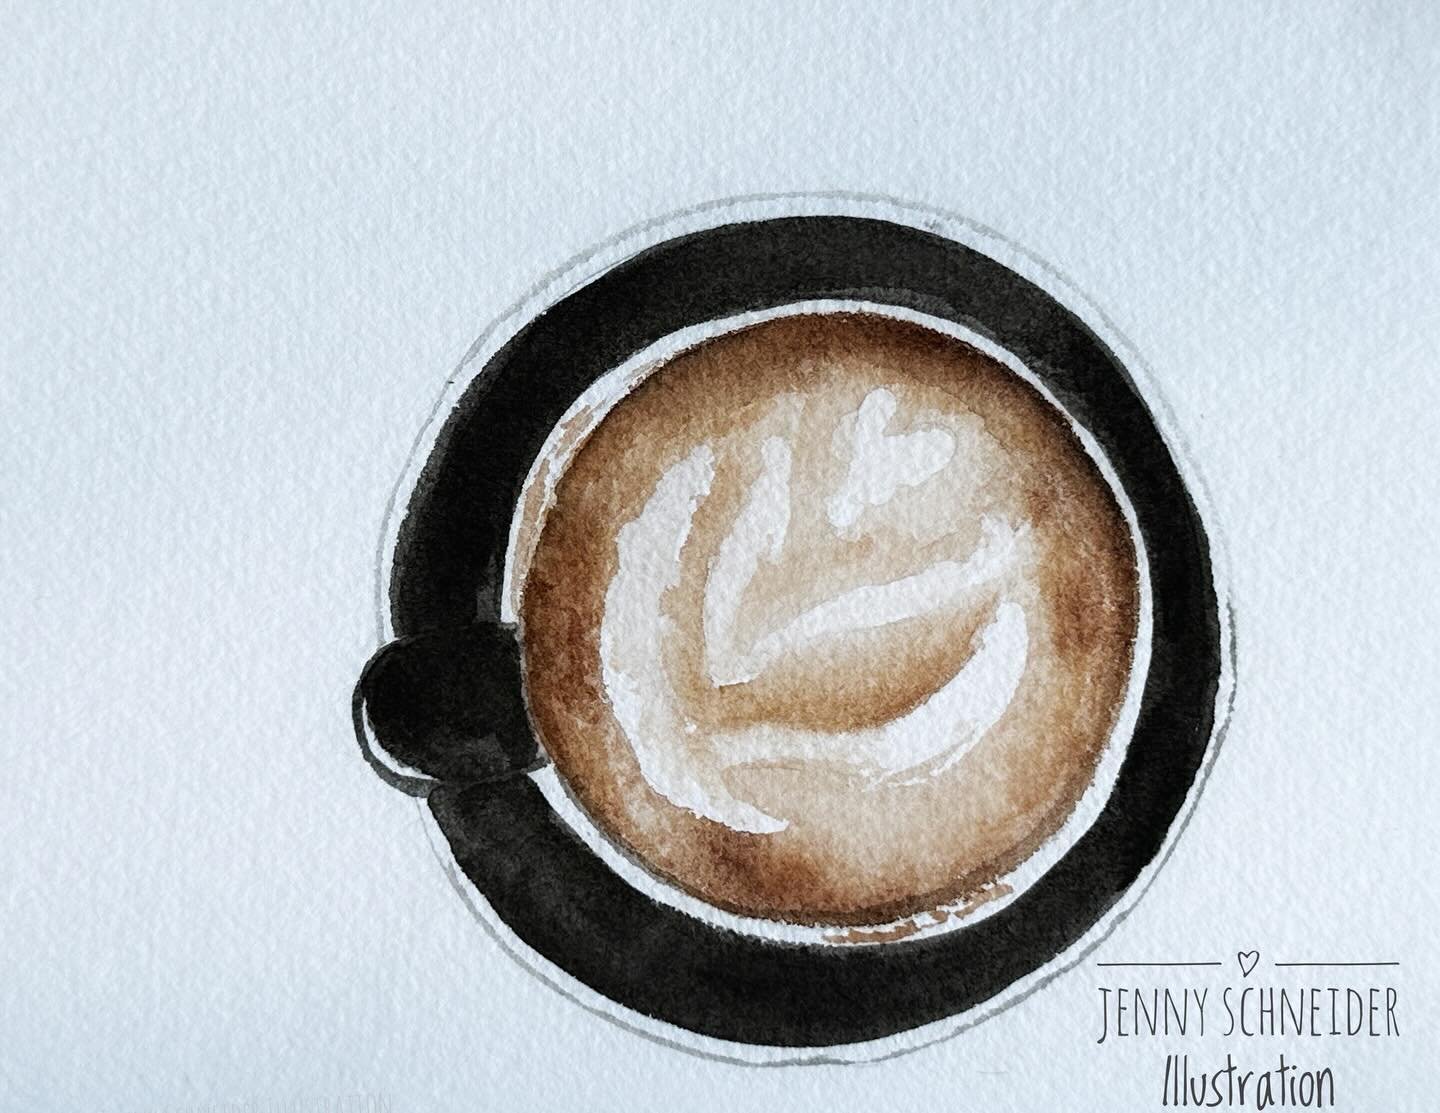 Yay- it&rsquo;s Friday. Just a little watercolor sketch inspired by the amazing coffee I had last week at @sixdepot 🤍
.
Where are your favorite coffee places in Massachusetts? Please share! 
.
.
.
#watercolorillustration #coffee #butfirstcoffee #six